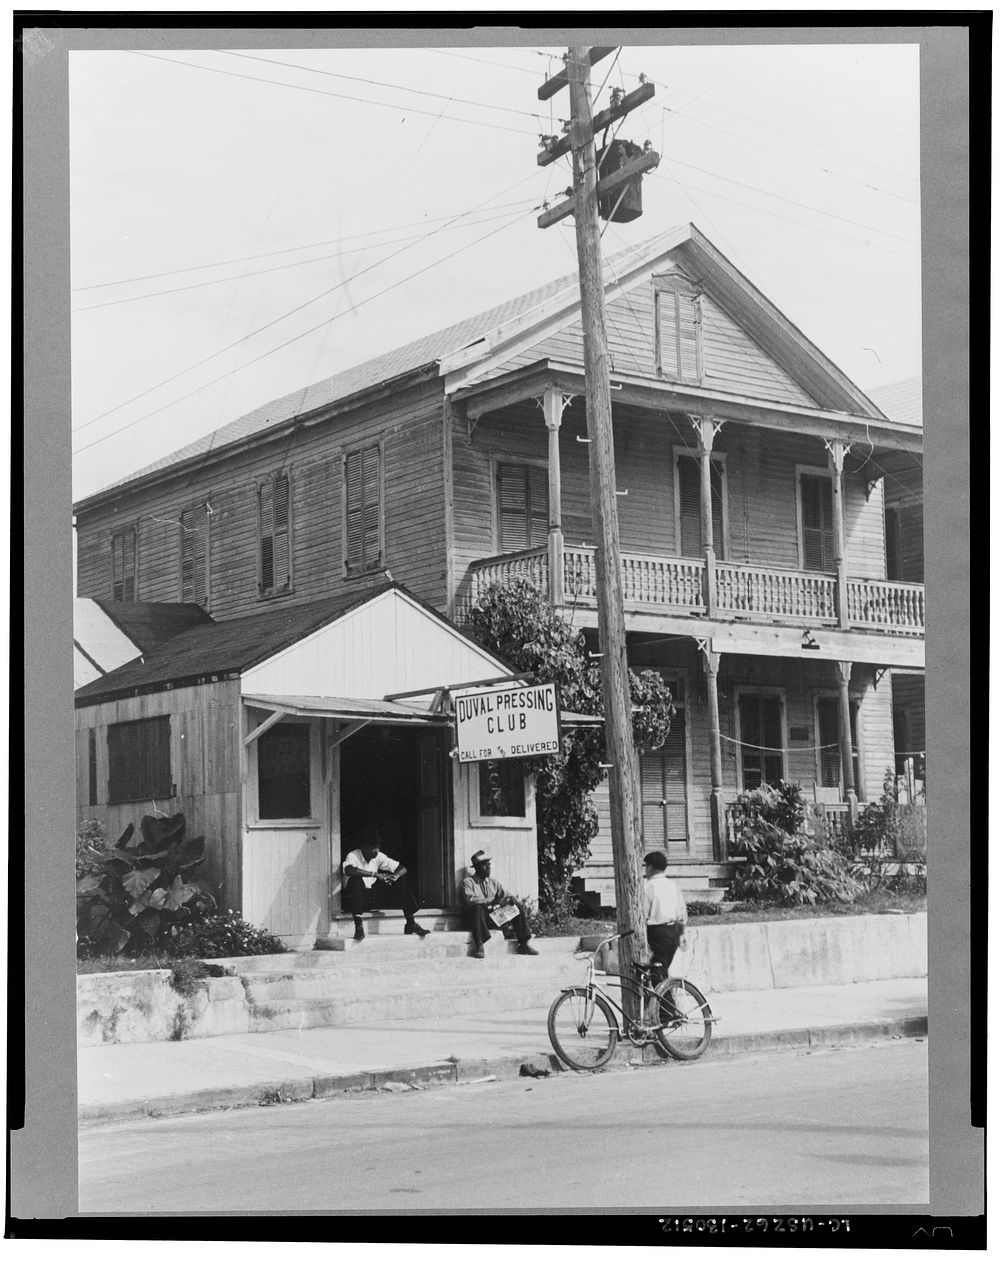 Duval Street, Key West, Florida. Sourced from the Library of Congress.